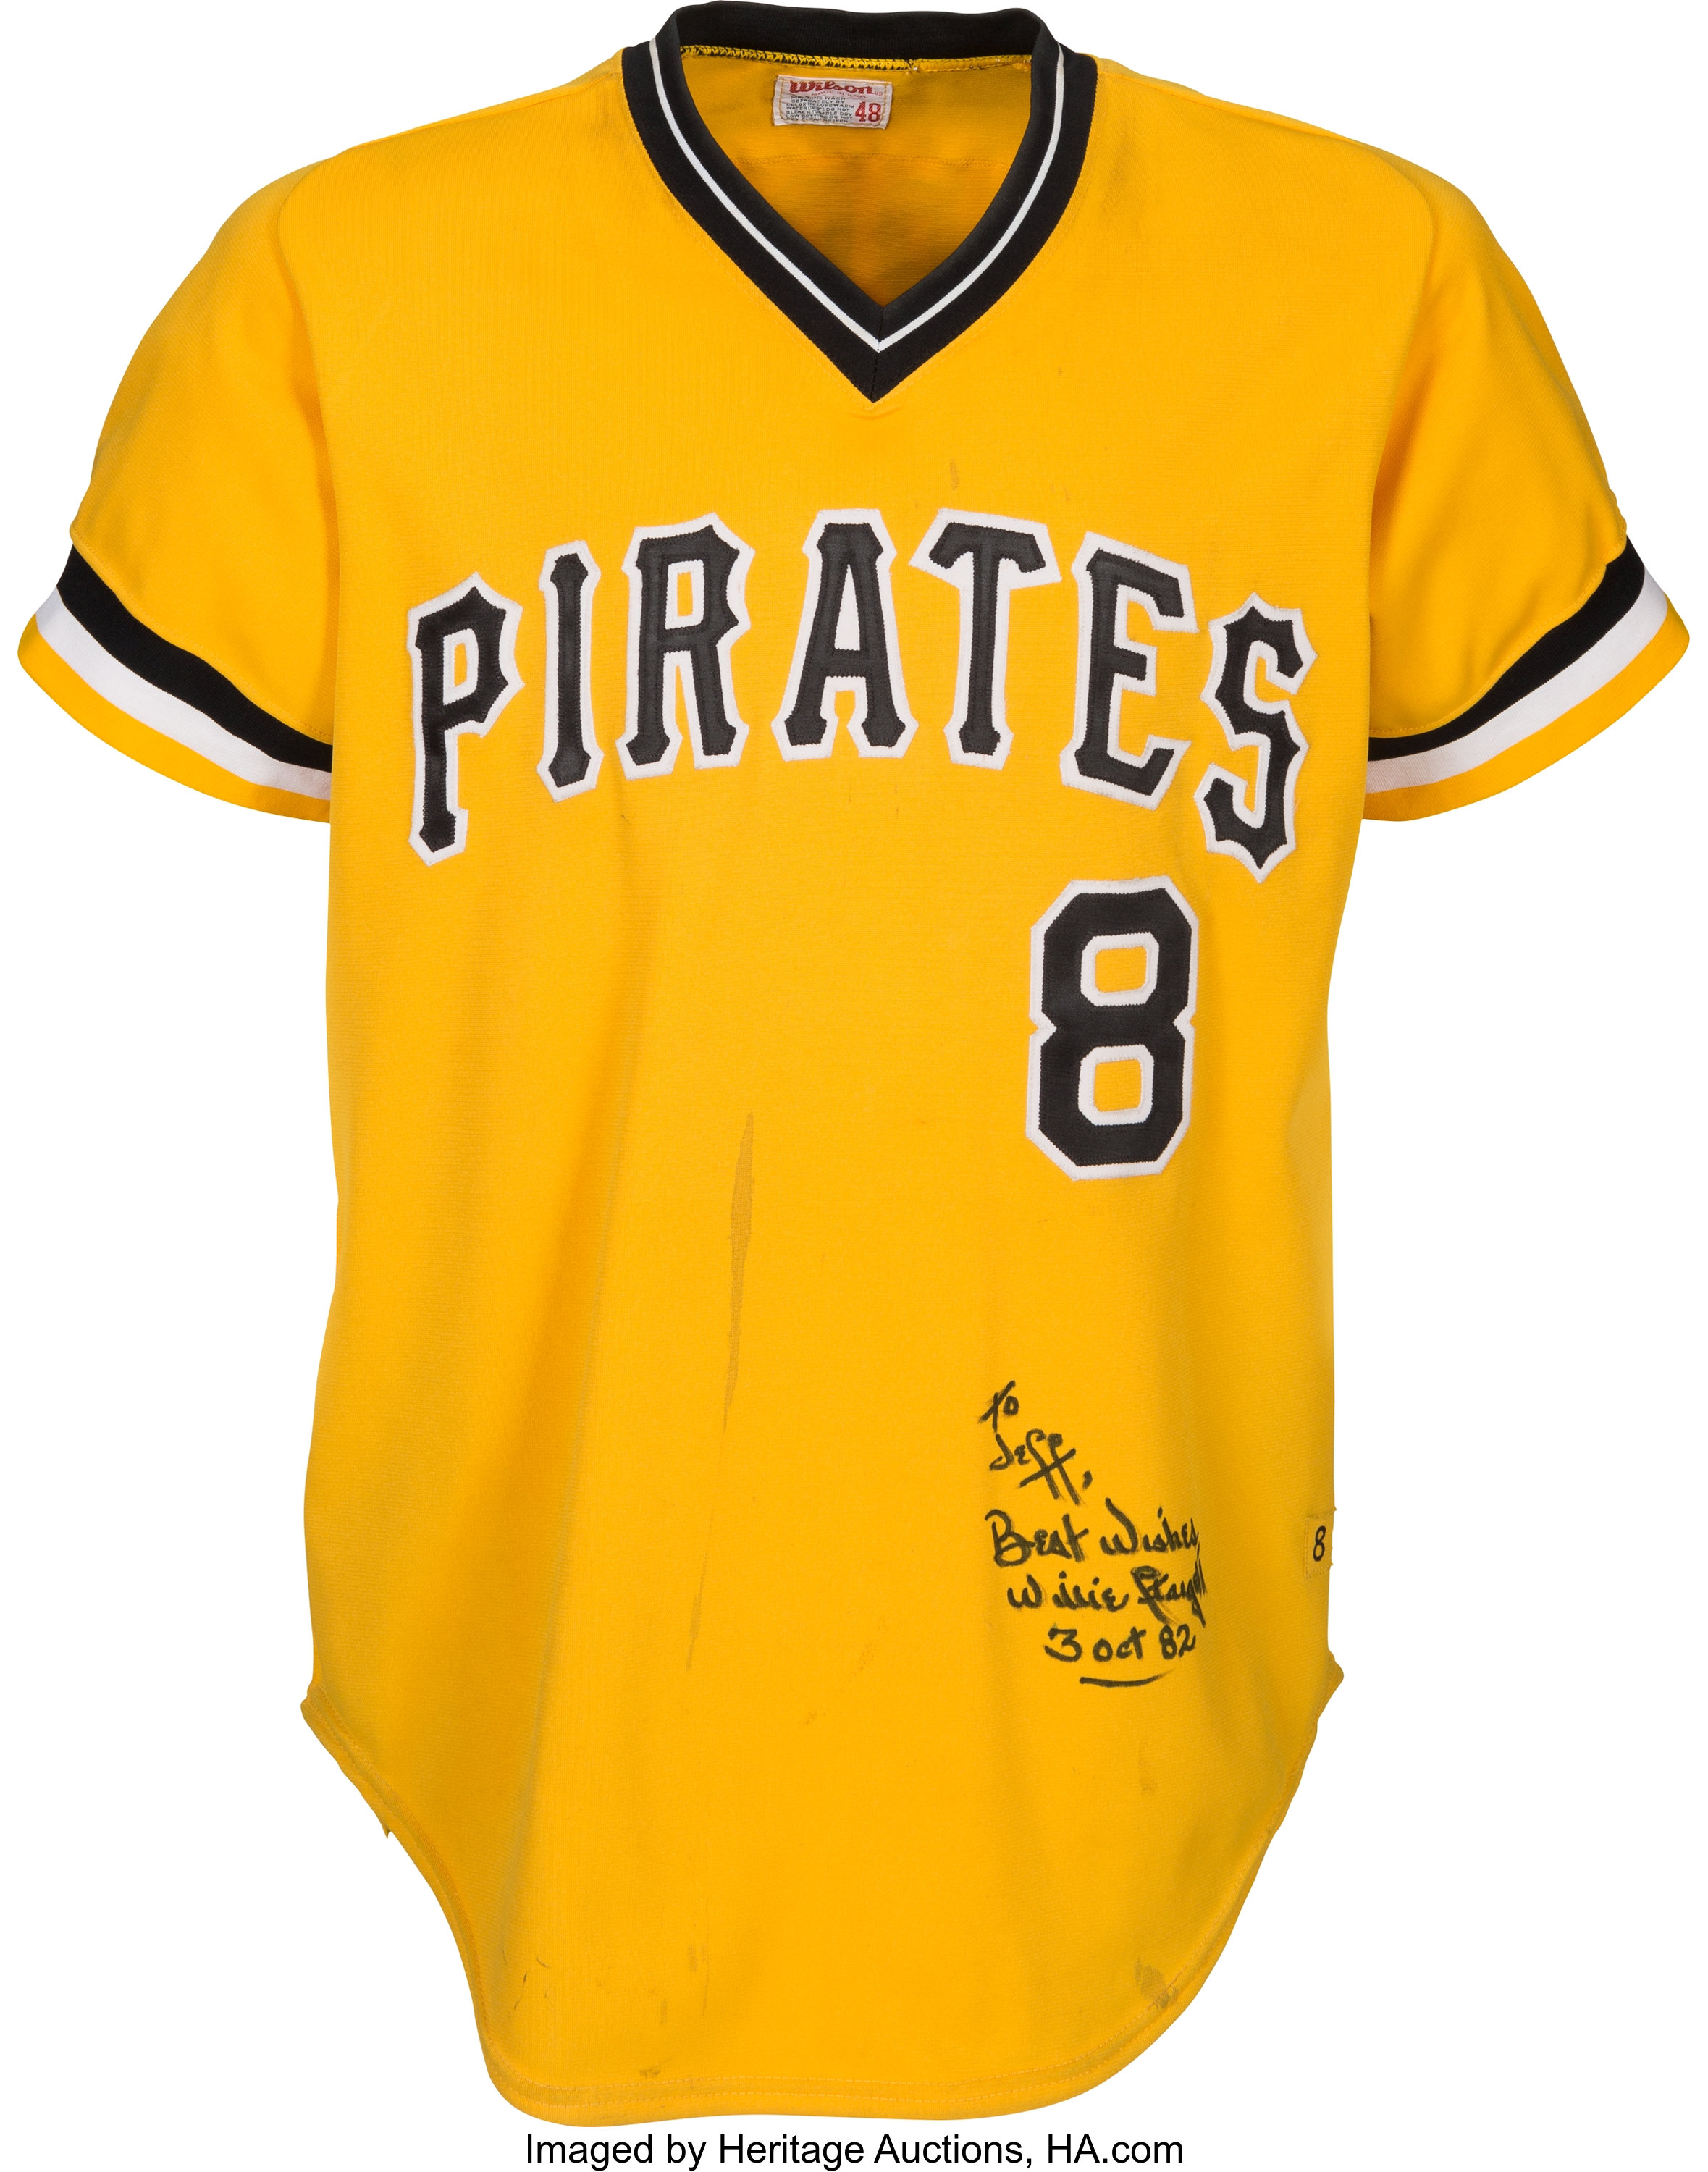 1982 Willie Stargell Game Worn & Signed Pittsburgh Pirates Jersey